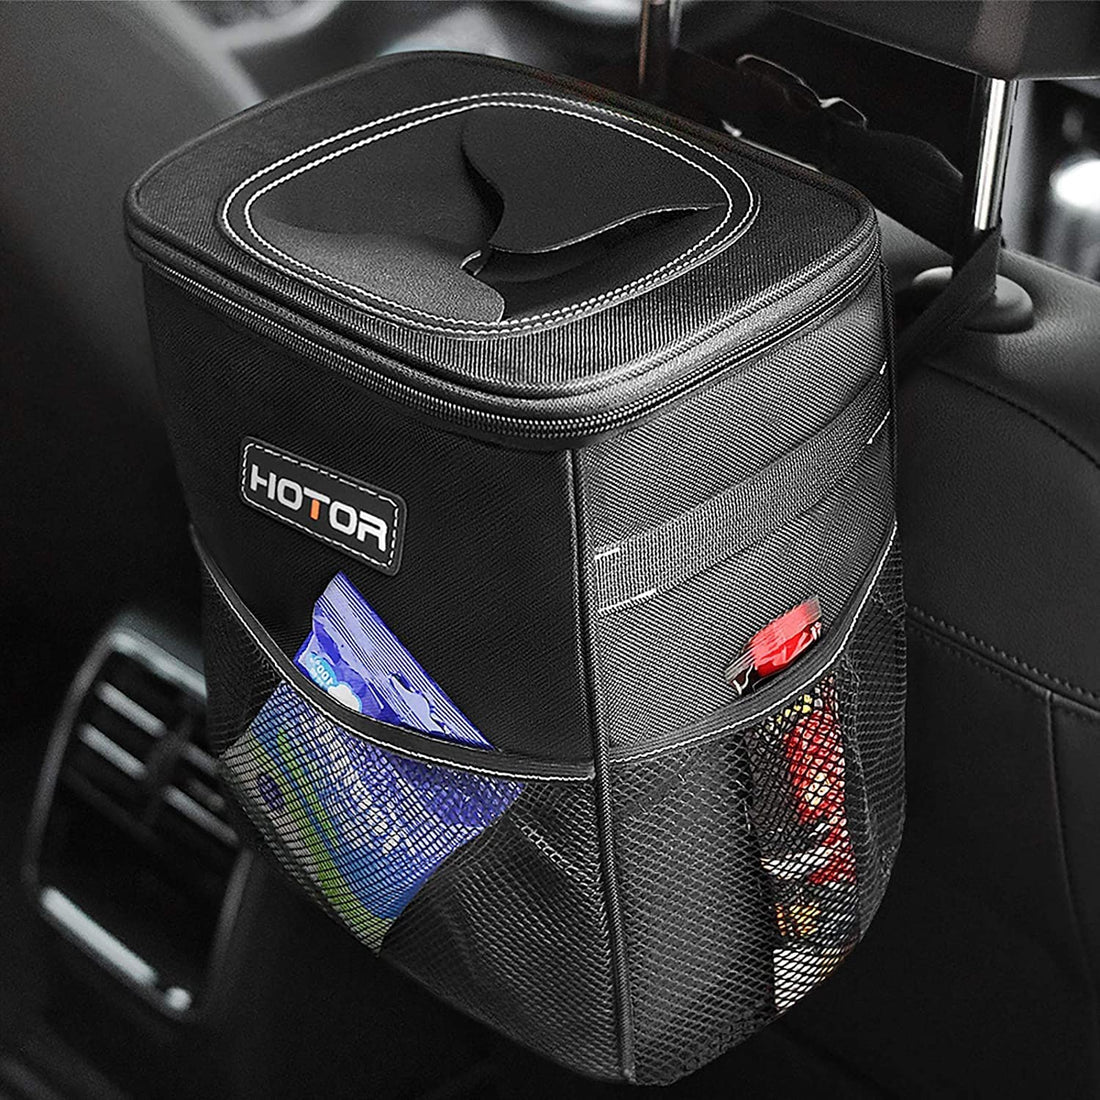 Top 7 Must Have Car Accessories To Keep Your Ride Clean